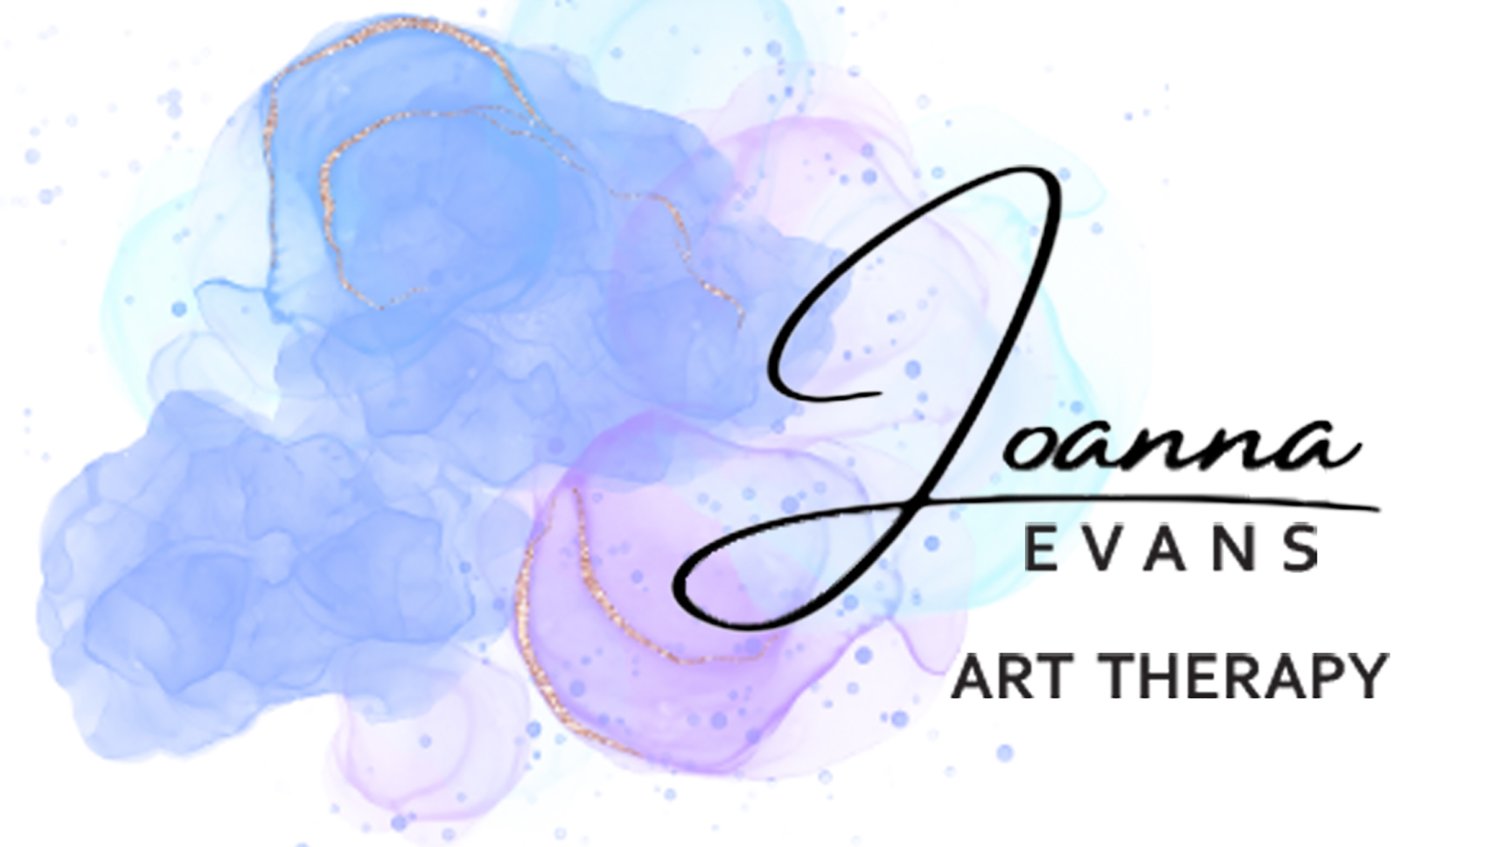 Joanna Evans - Art Therapy